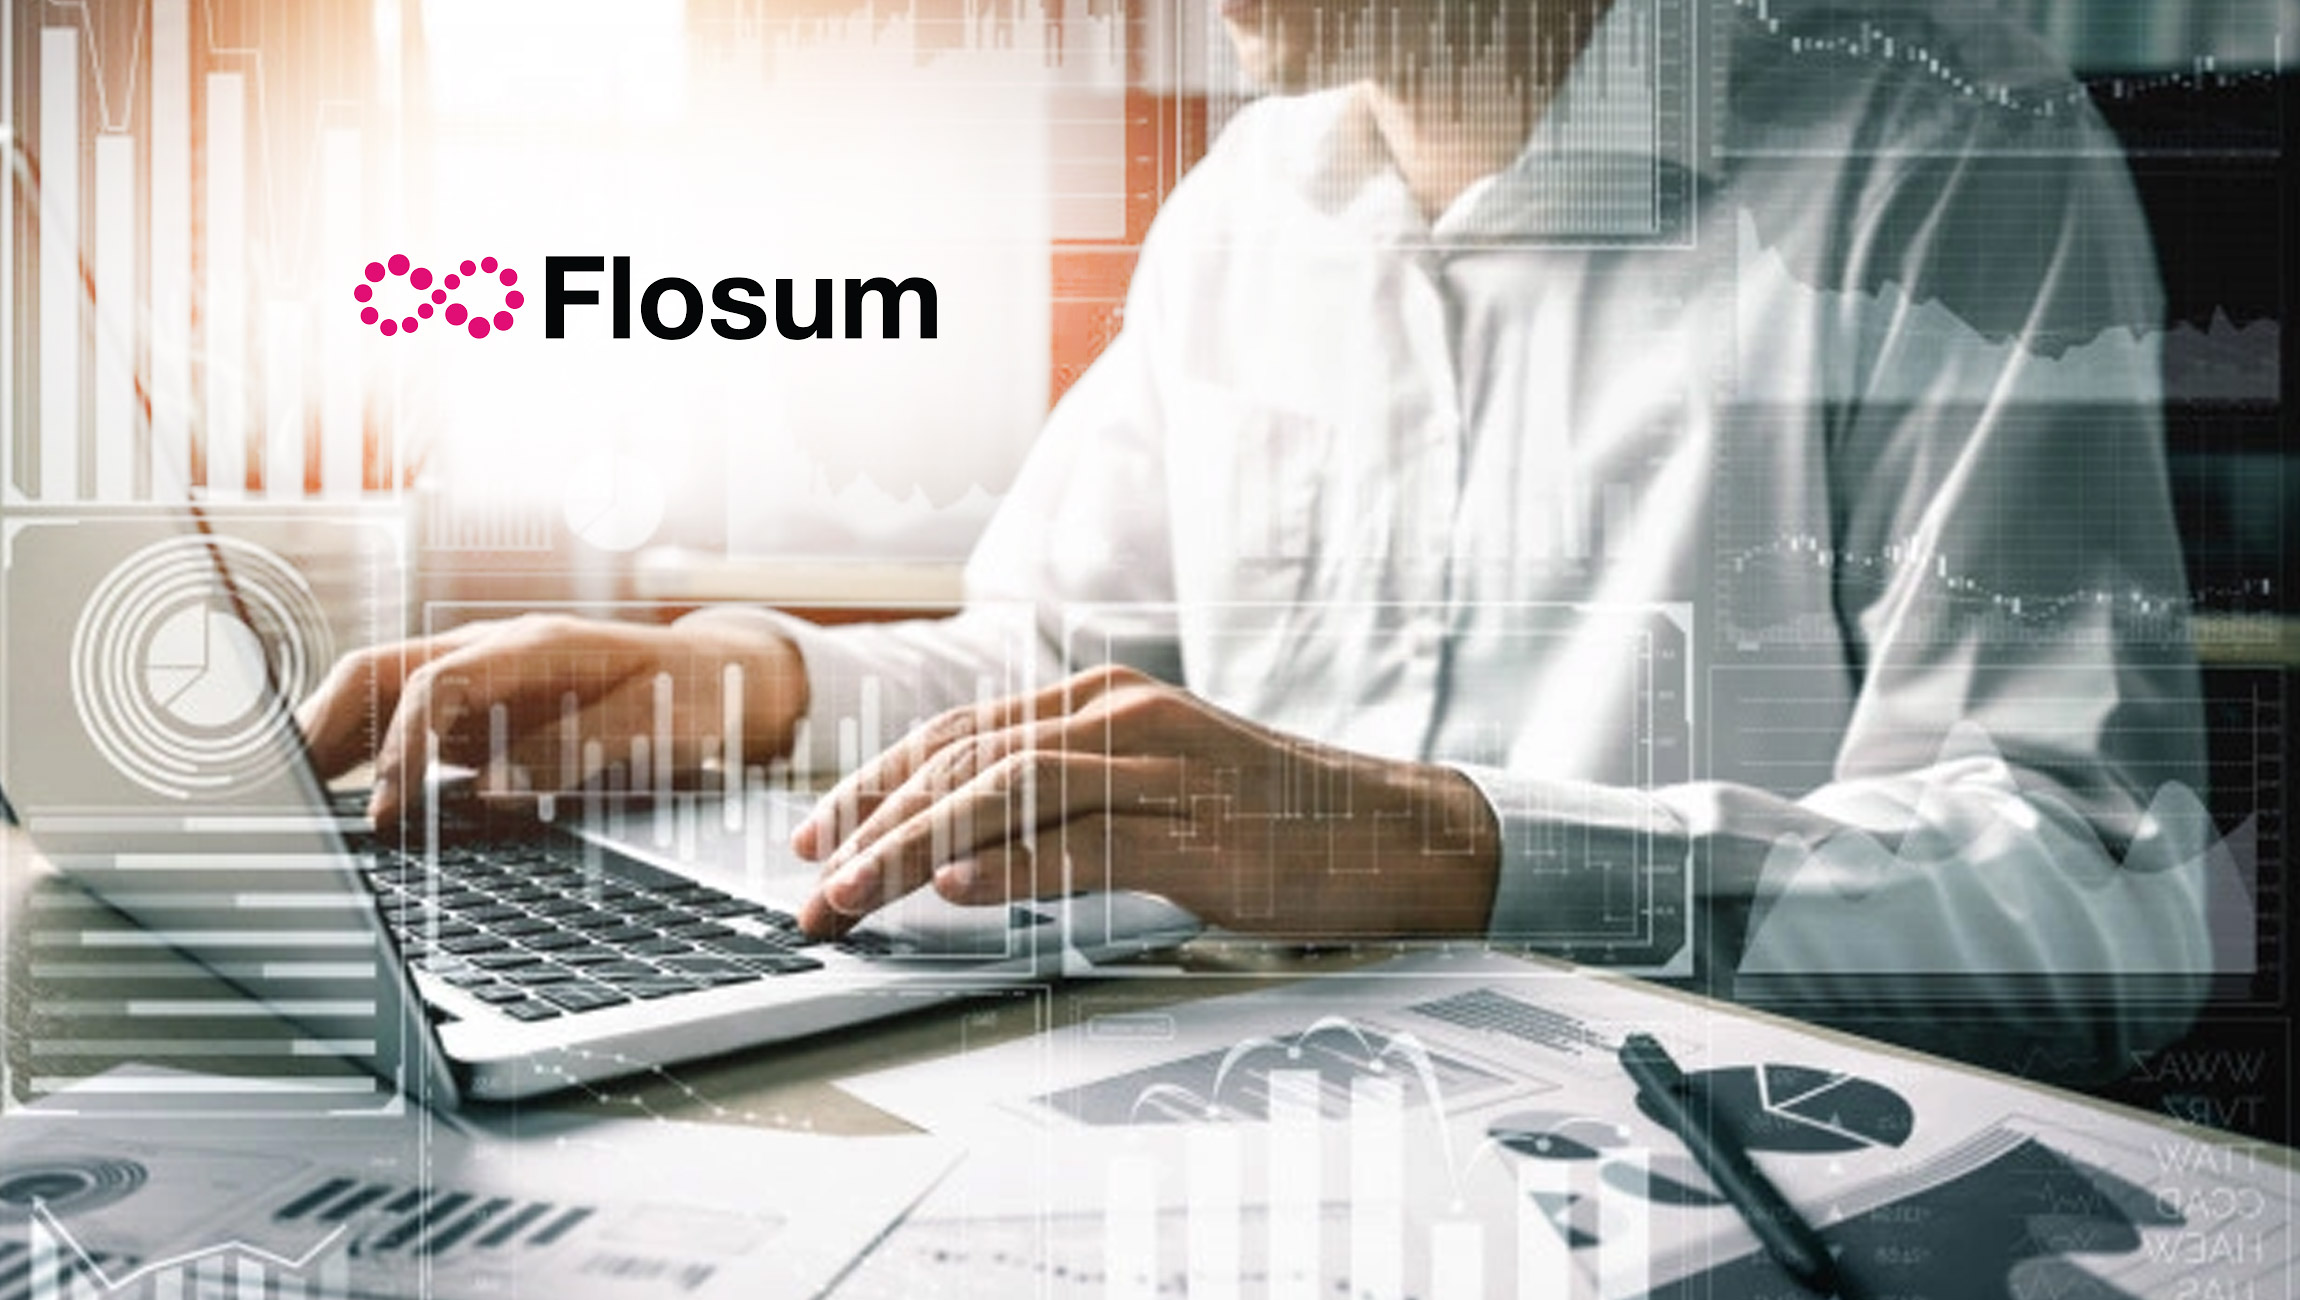 Flosum Launches New Trust Center Security Solution To Monitor, Alert And Scan For Any Potential Threats Within Salesforce